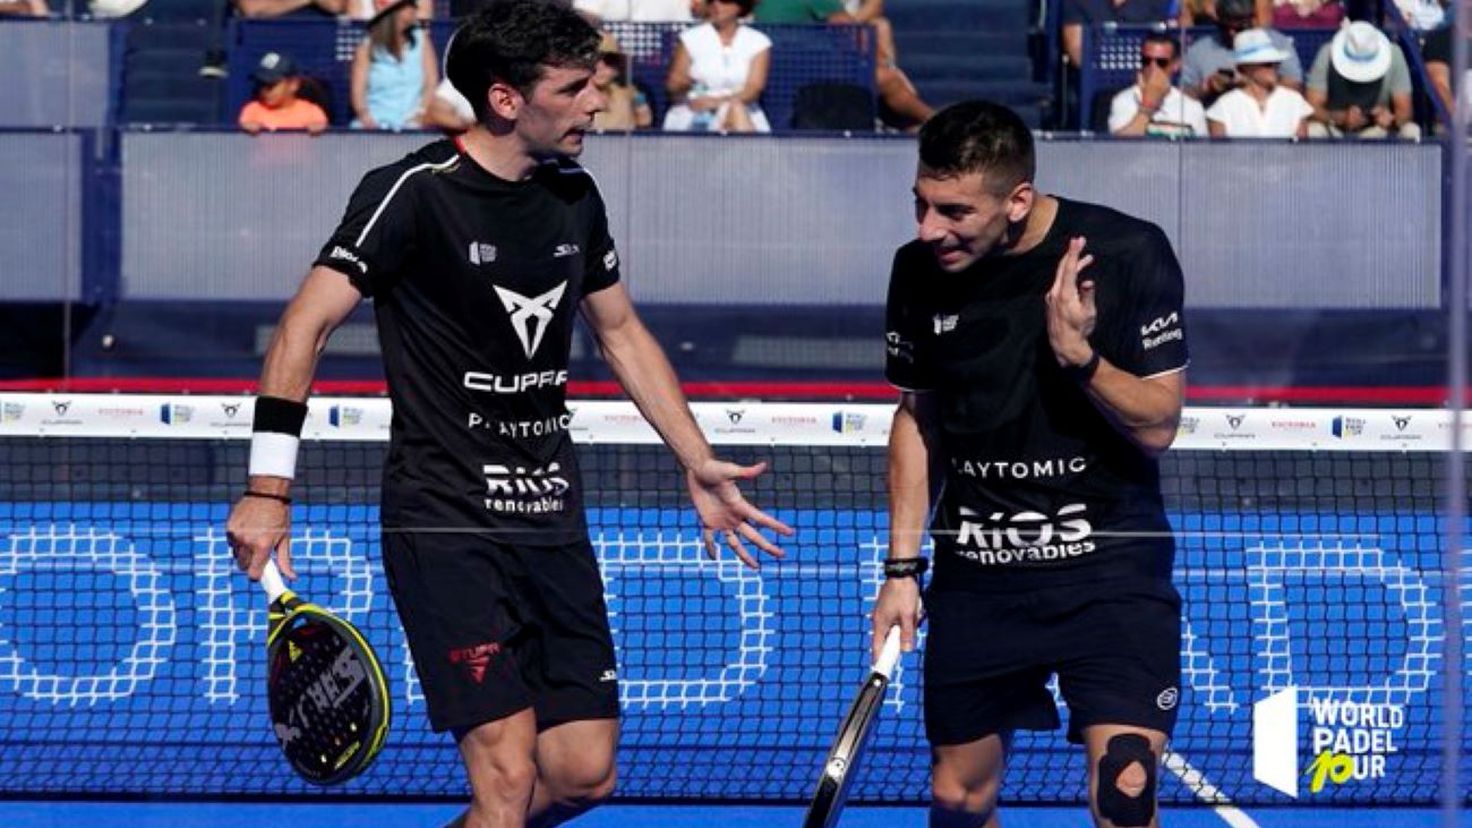 Another couples revolution for the Toulouse Open
